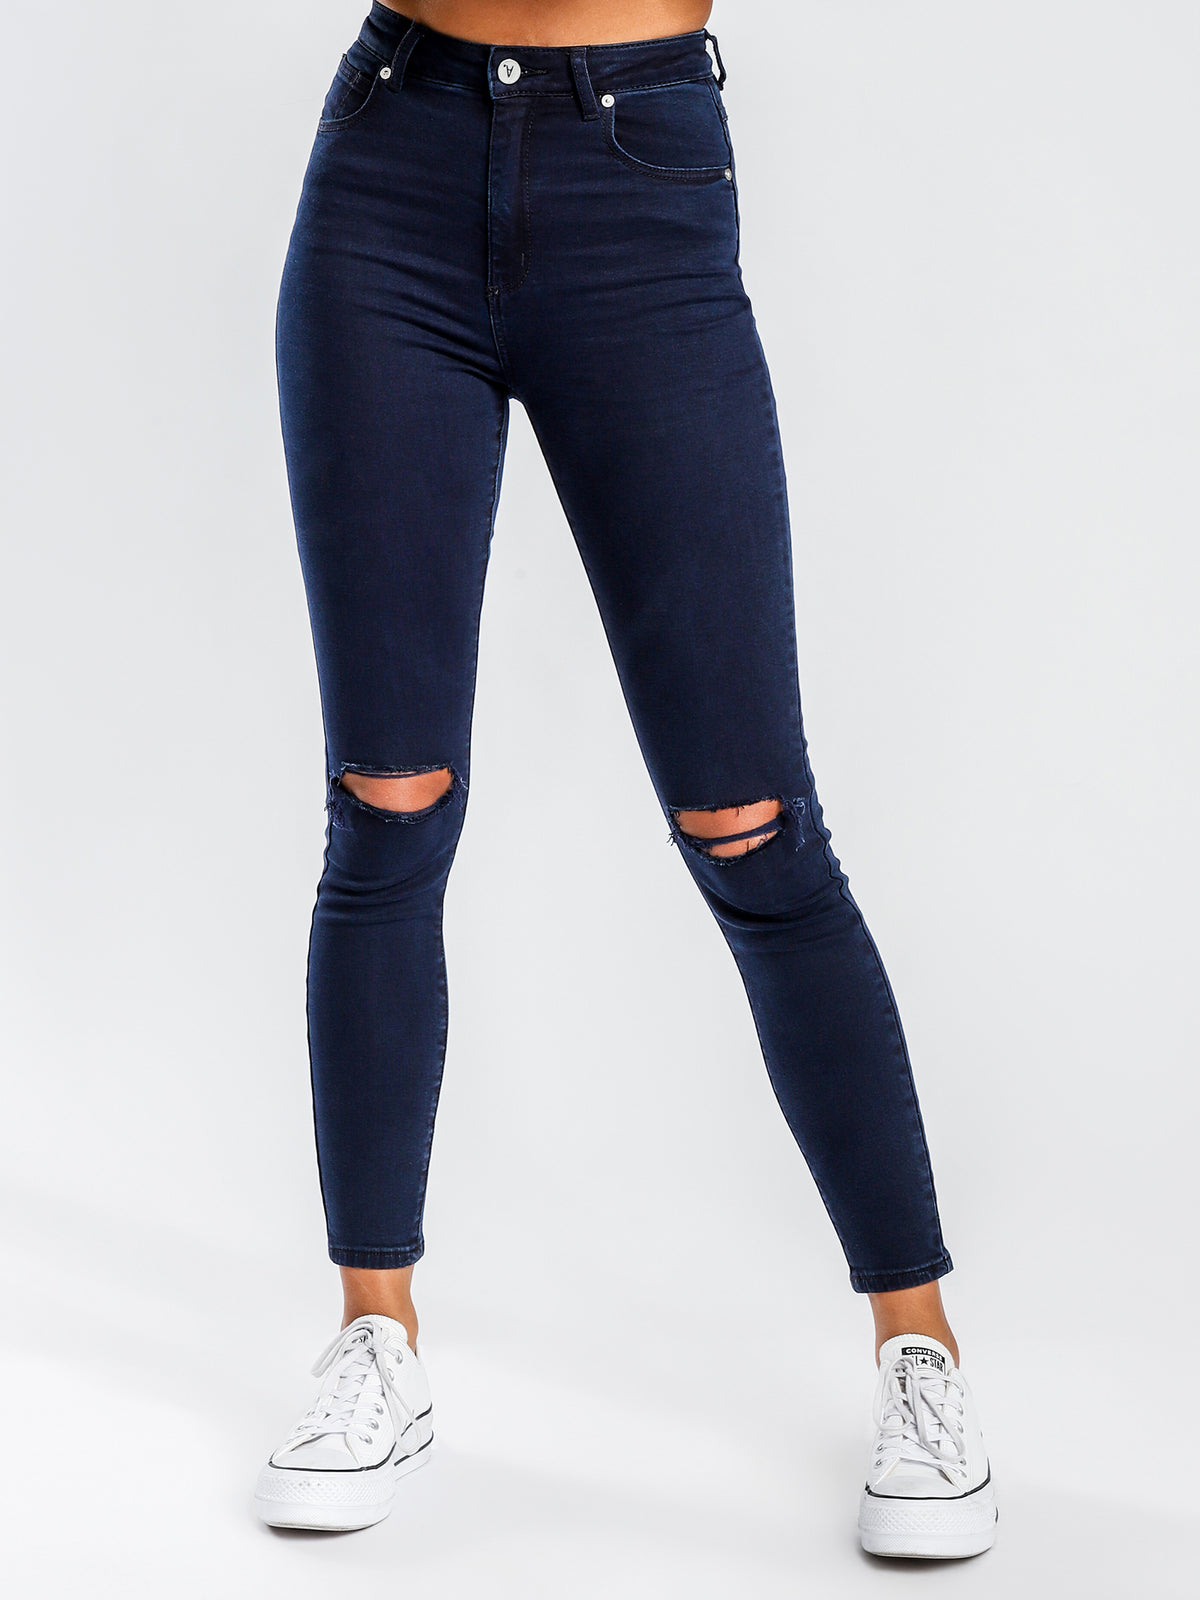 A High Waisted Skinny Anke Basher Jeans in Cherie